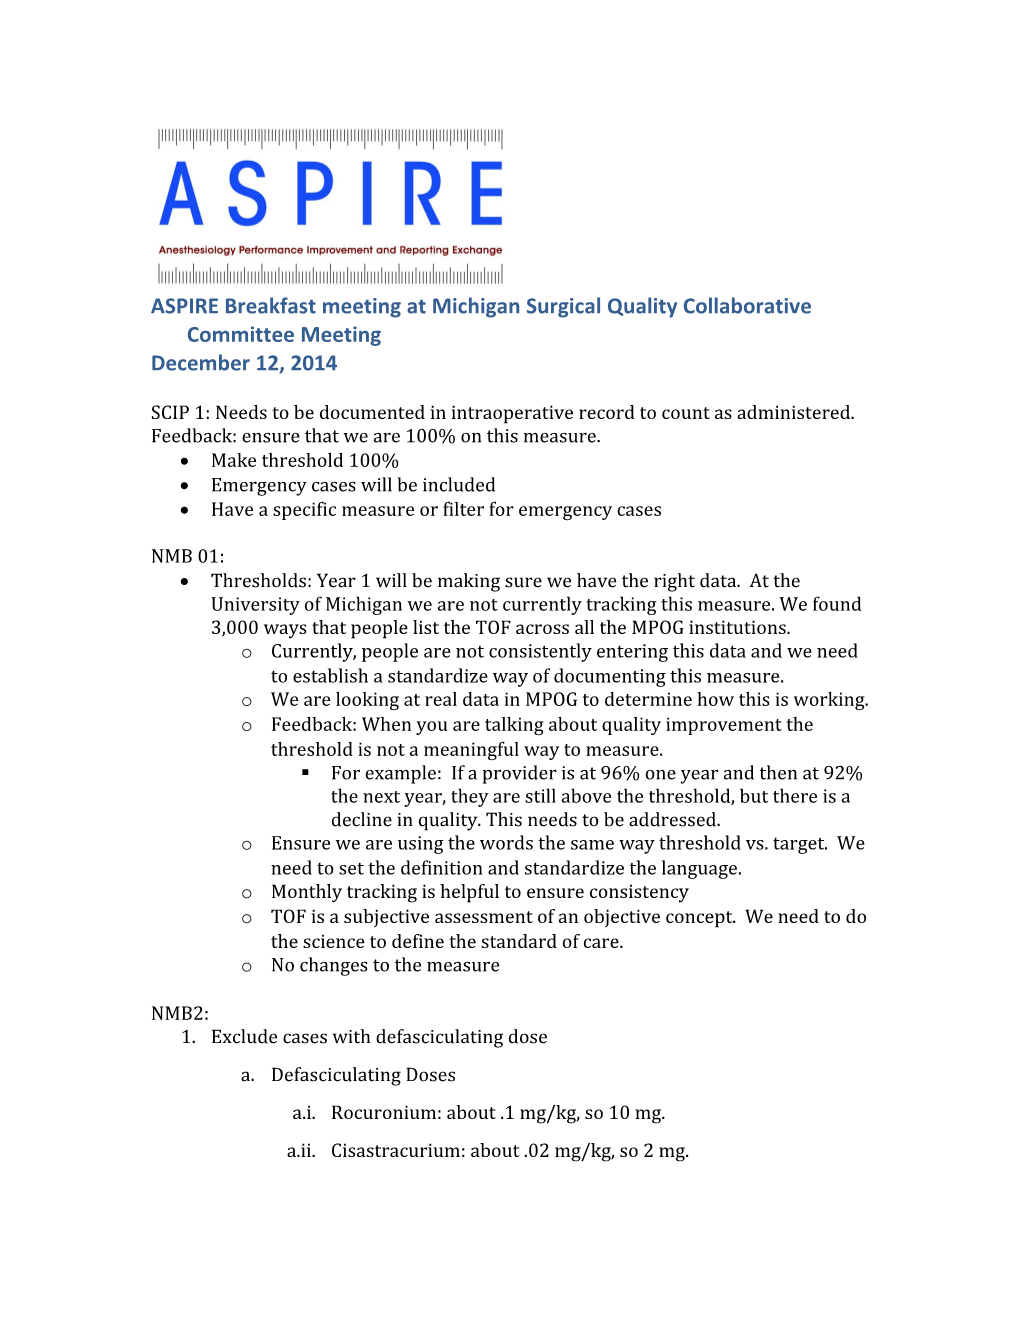 ASPIRE Breakfast Meeting at Michigan Surgical Quality Collaborative Committee Meeting